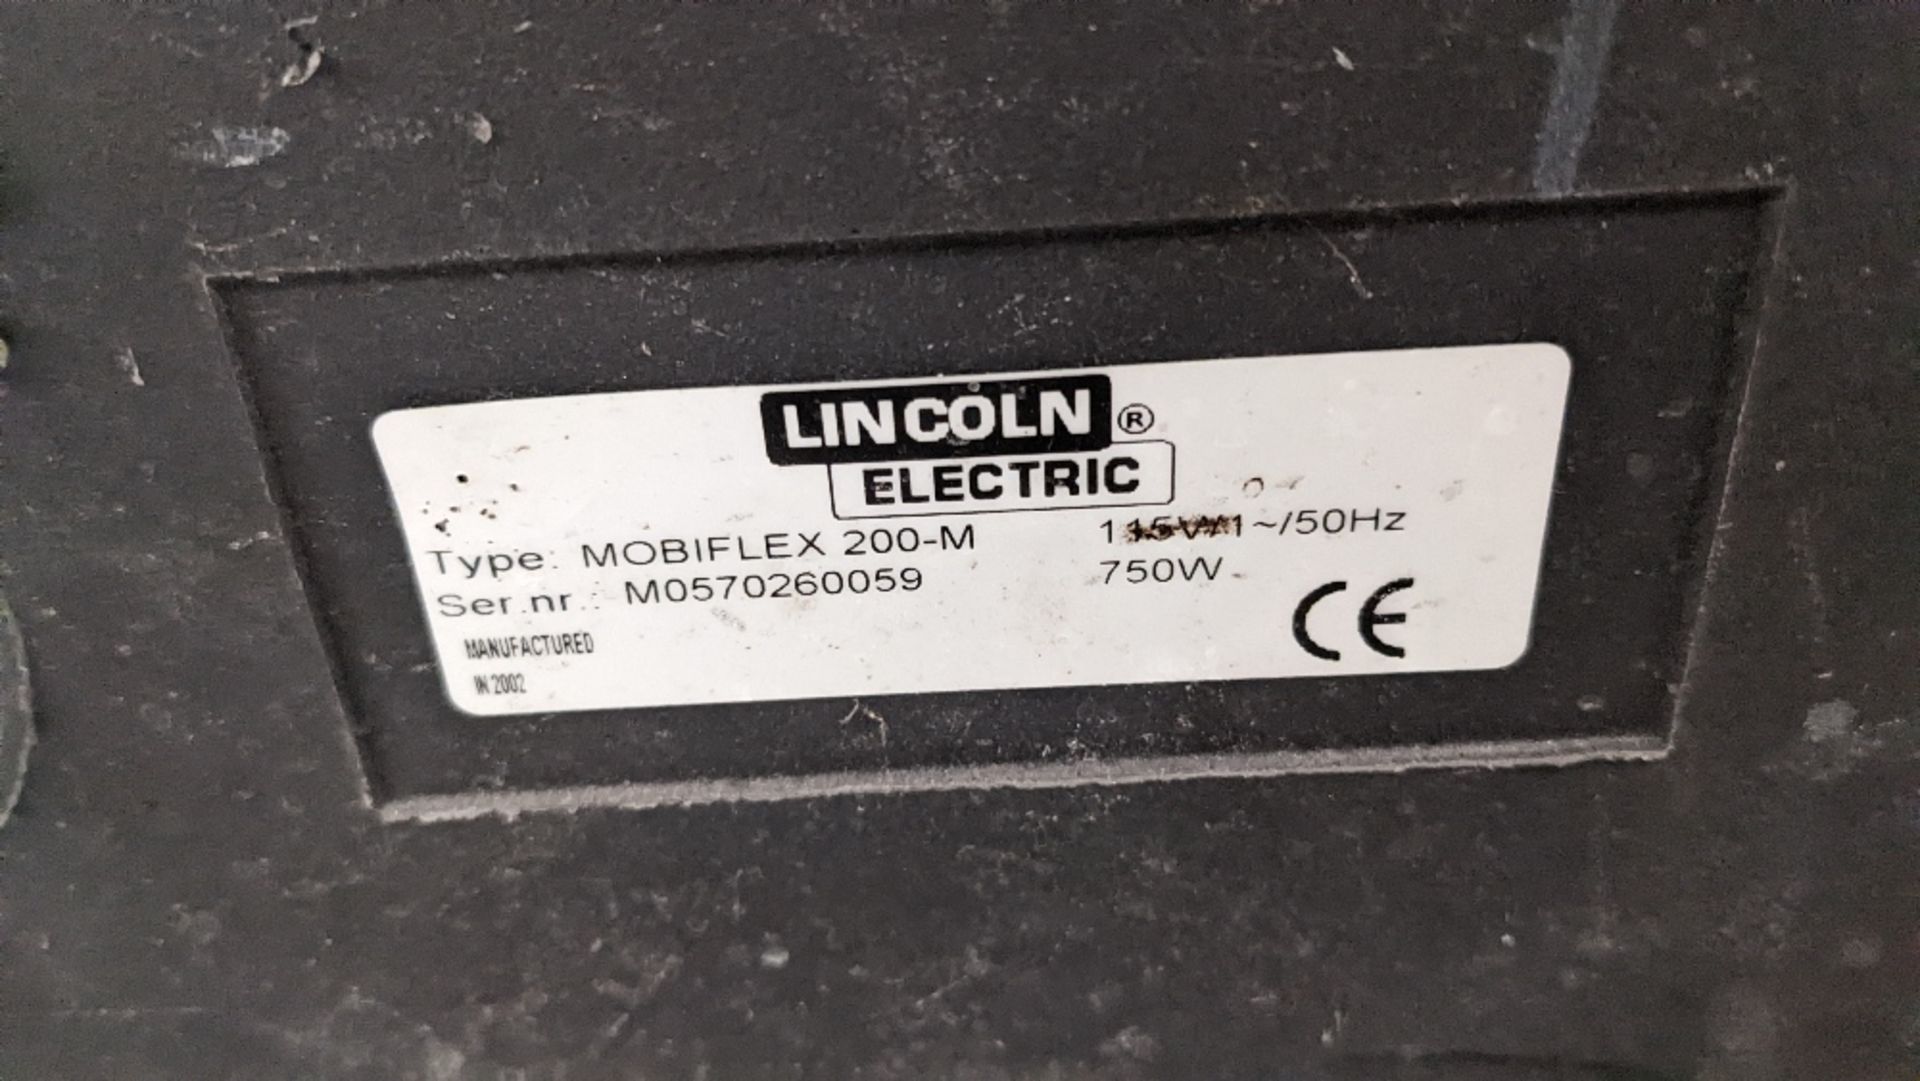 Lincoln electric 240v Mobi-flex 200-M fume extractor (2002) - Image 4 of 4